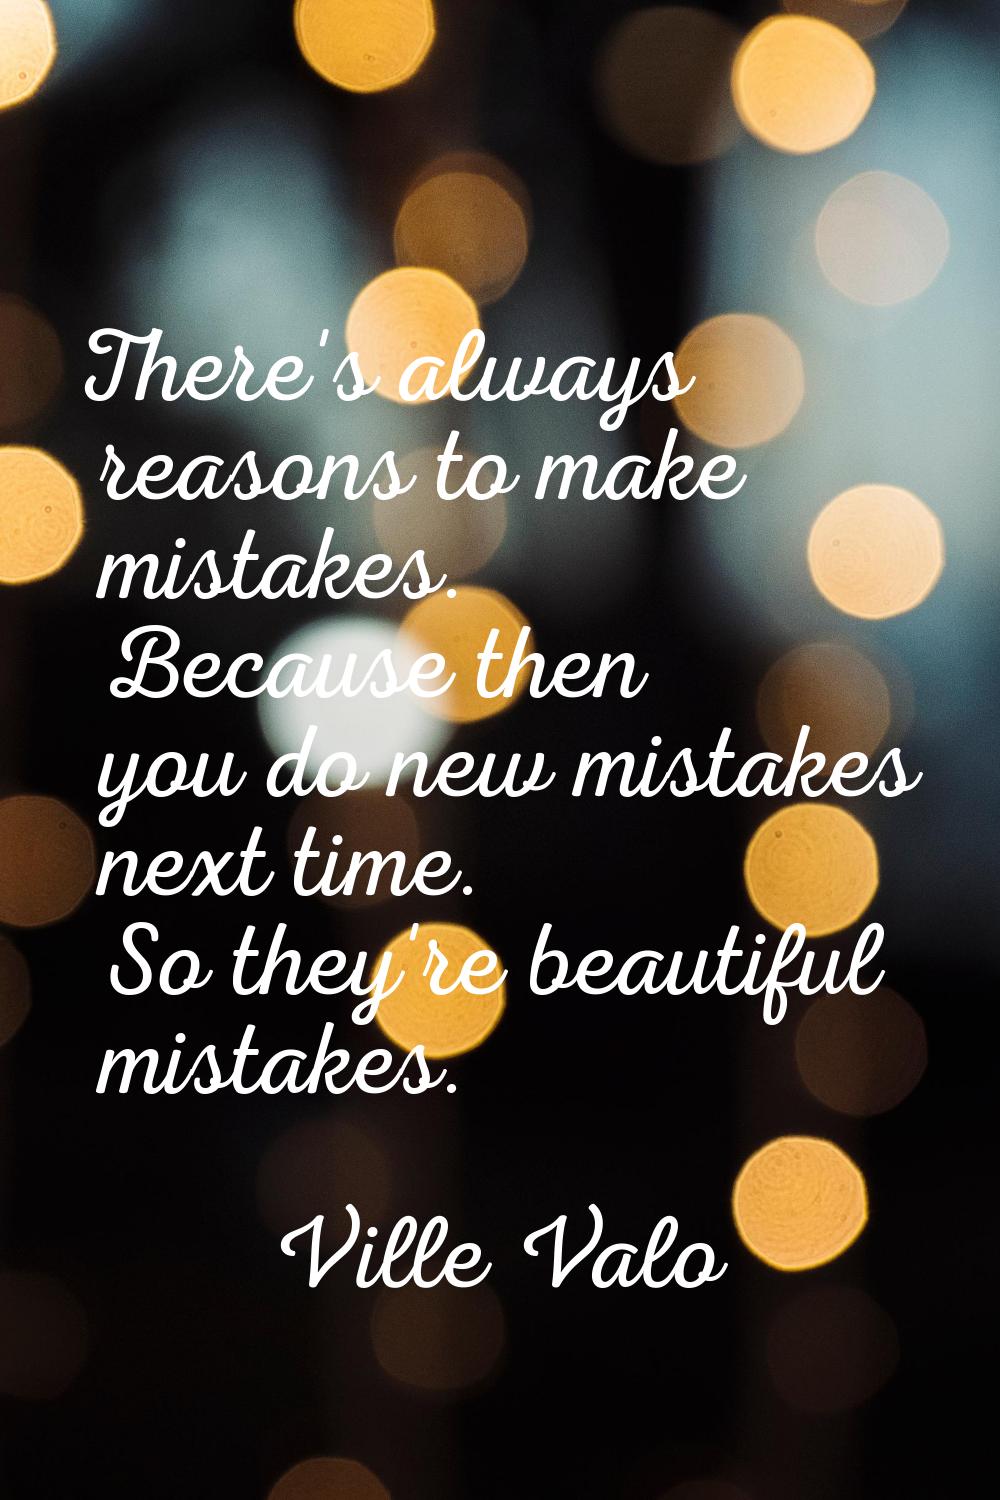 There's always reasons to make mistakes. Because then you do new mistakes next time. So they're bea